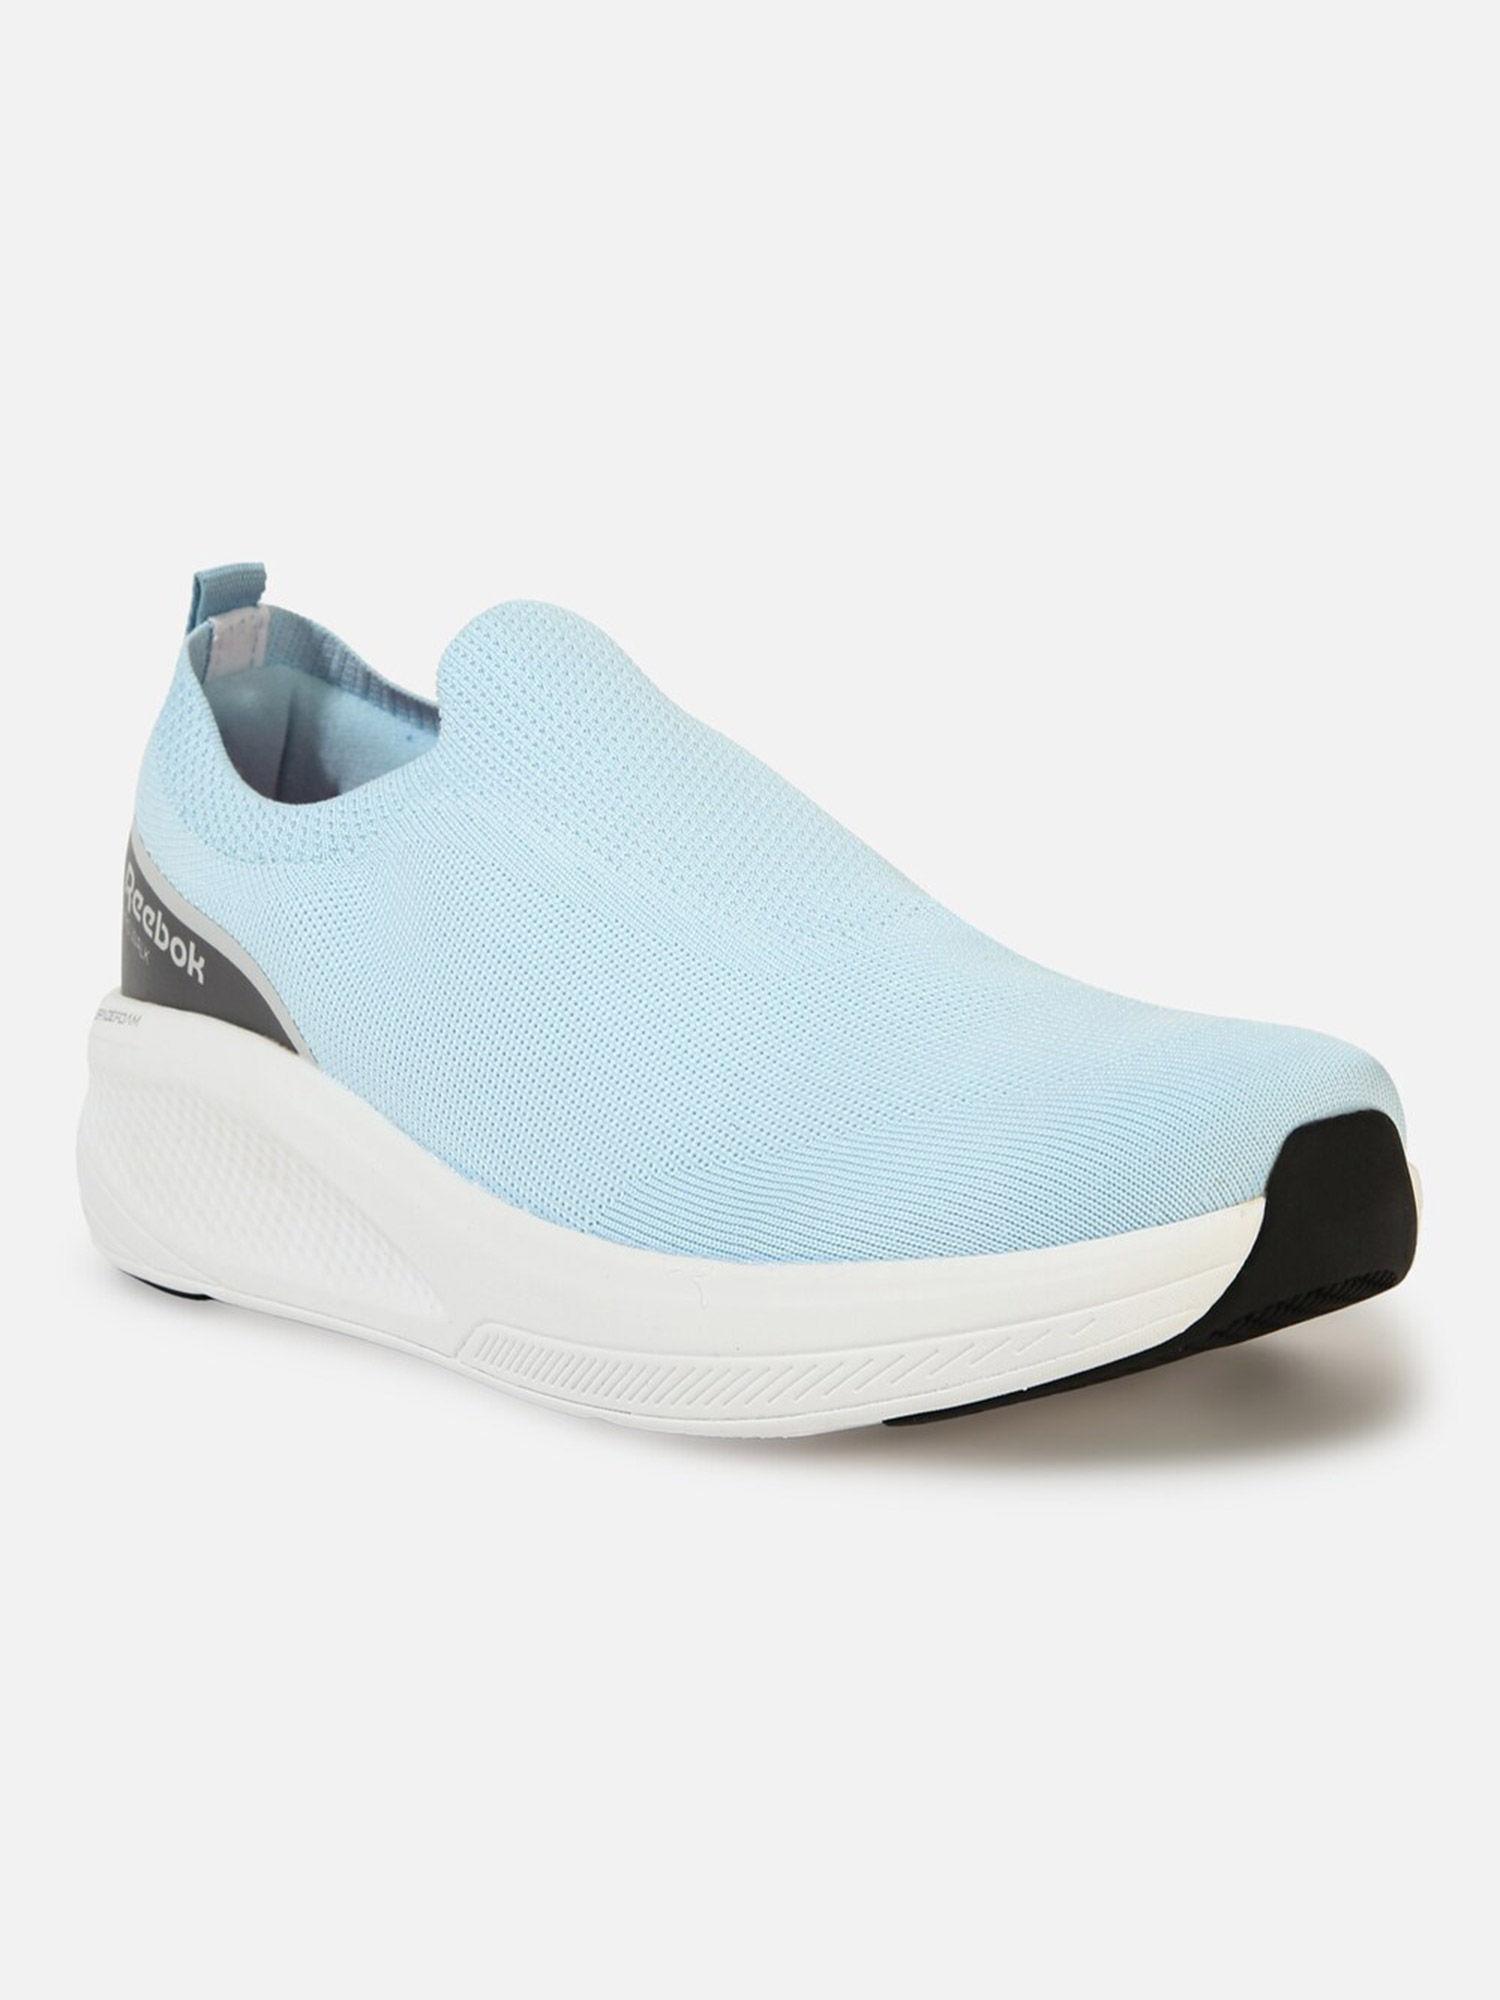 mens-soft-elevate-slip-on-casual-shoes-space-foam